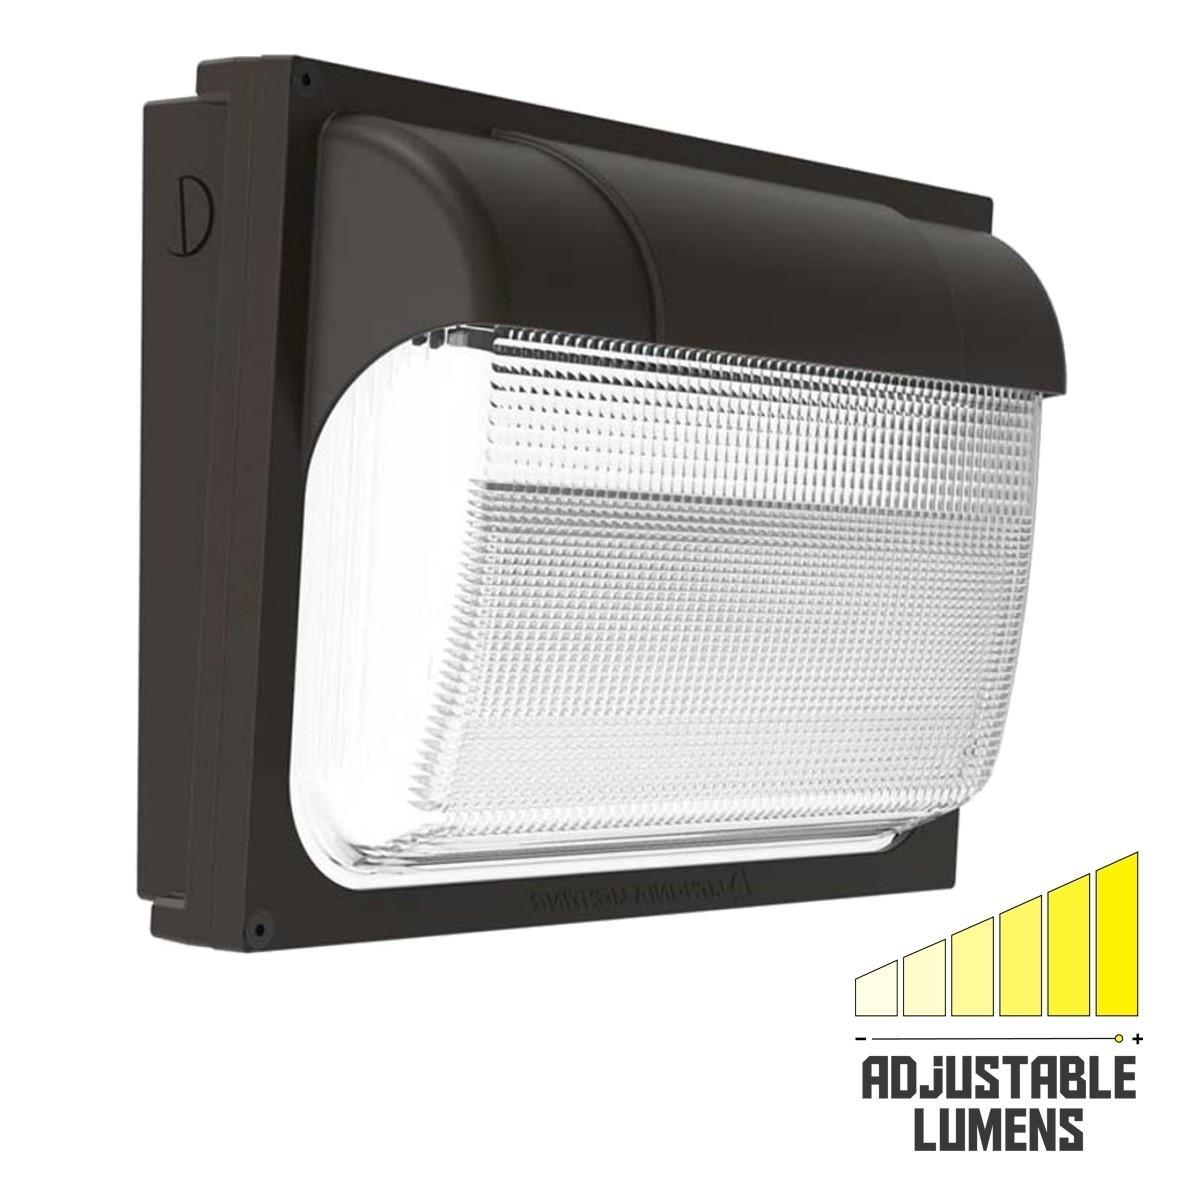 LED Standard Wall Pack With Photocell 54 Watts Adjustable 6,600 Lumens 4000K 120-277V - Bees Lighting